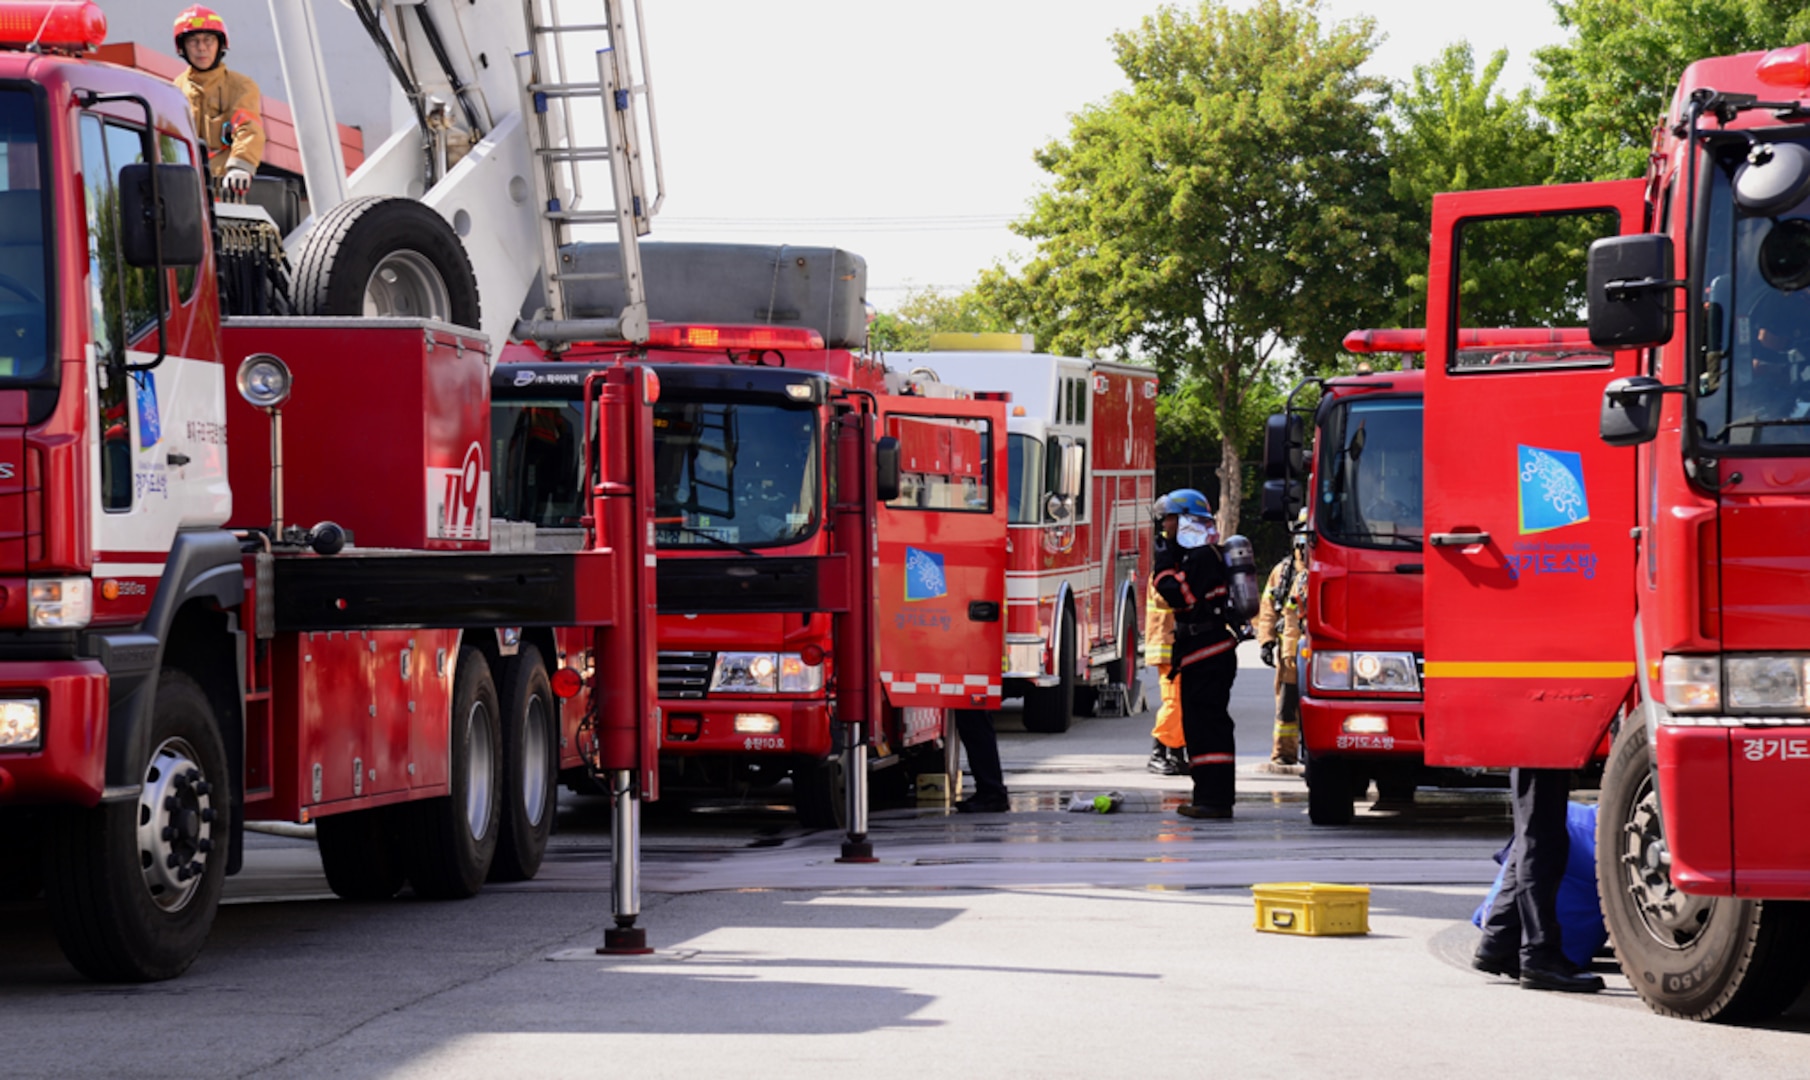 OSAN AIR BASE, Republic of Korea (Sept. 24, 2015) - Firefighters from the 51st Civil Engineer Squadron and South Korean first-responders line up their vehicles near a simulated factory fire near Songtan.  The 51 CES members are from Osan Air Base and took part in a hazardous materials training session in order to test each fire station's capabilities. 